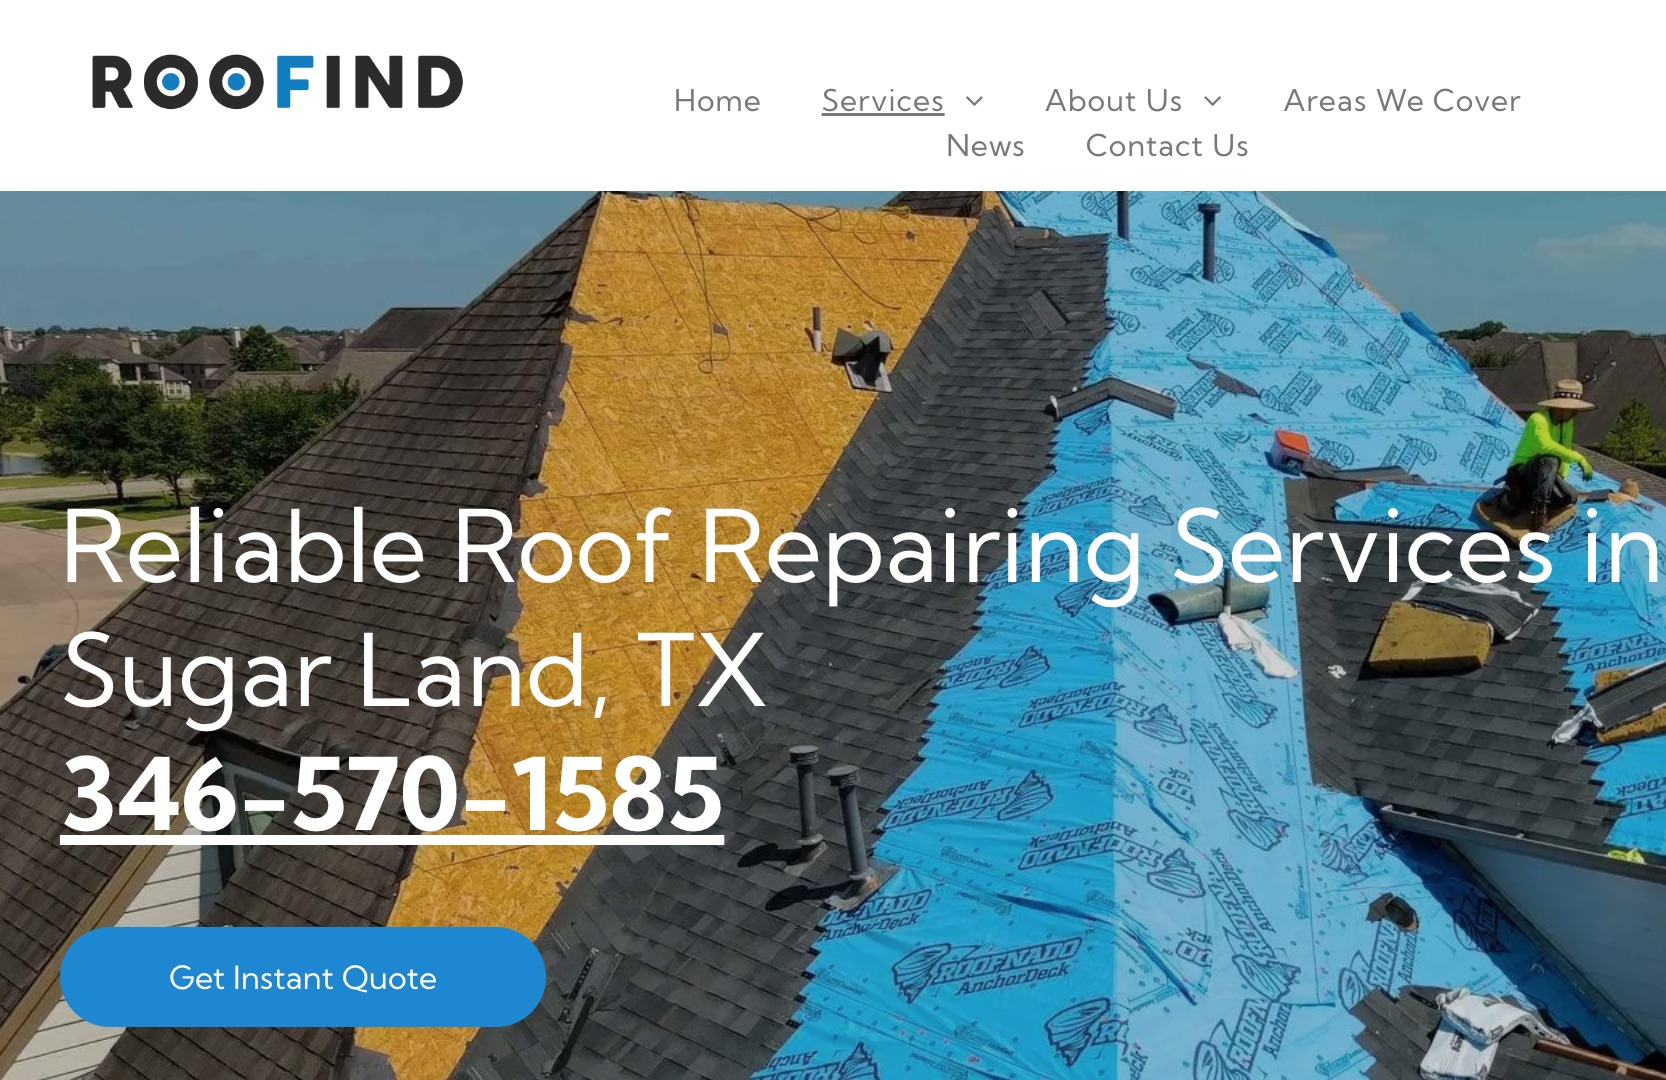 Top-Rated and Trusted: Roofind’s Signature Roofing in Houston